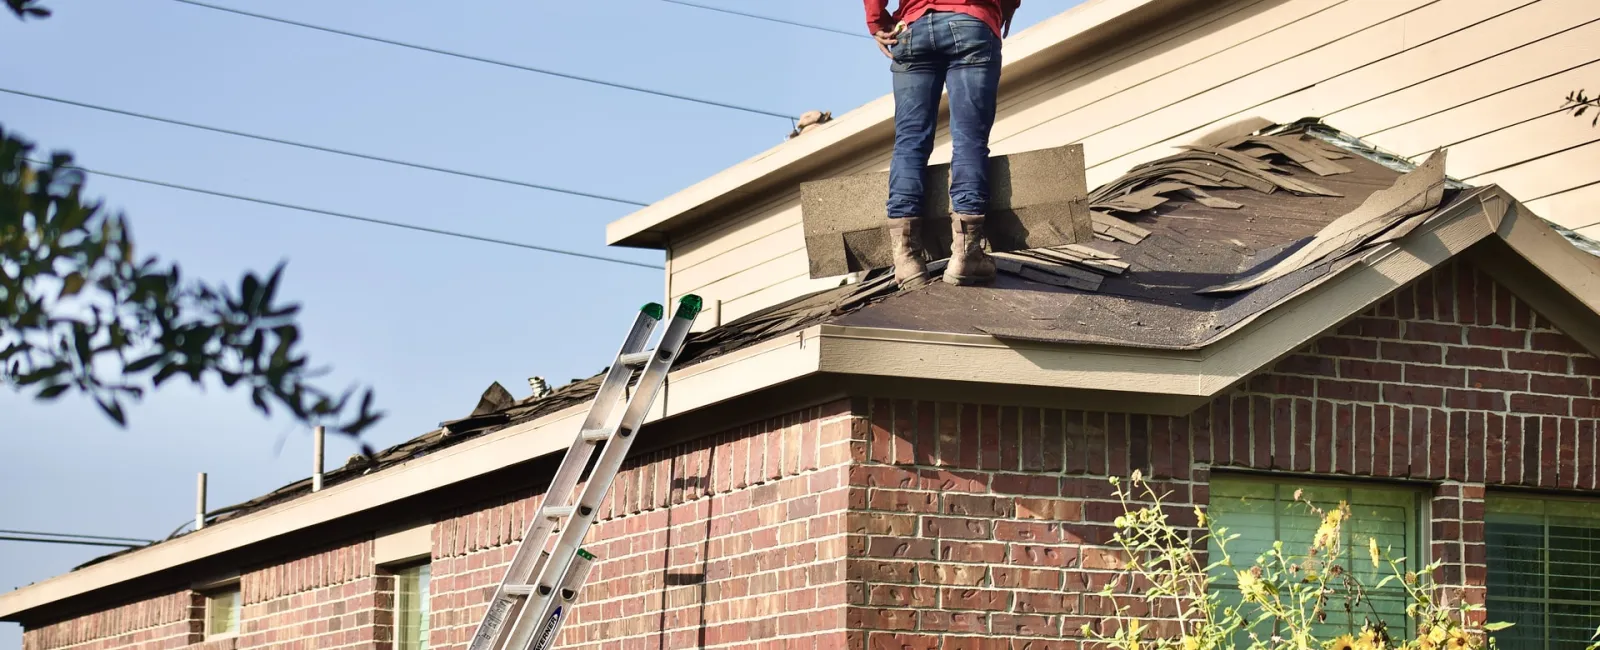 7 Compelling Reasons Why Roof Maintenance Is Necessary